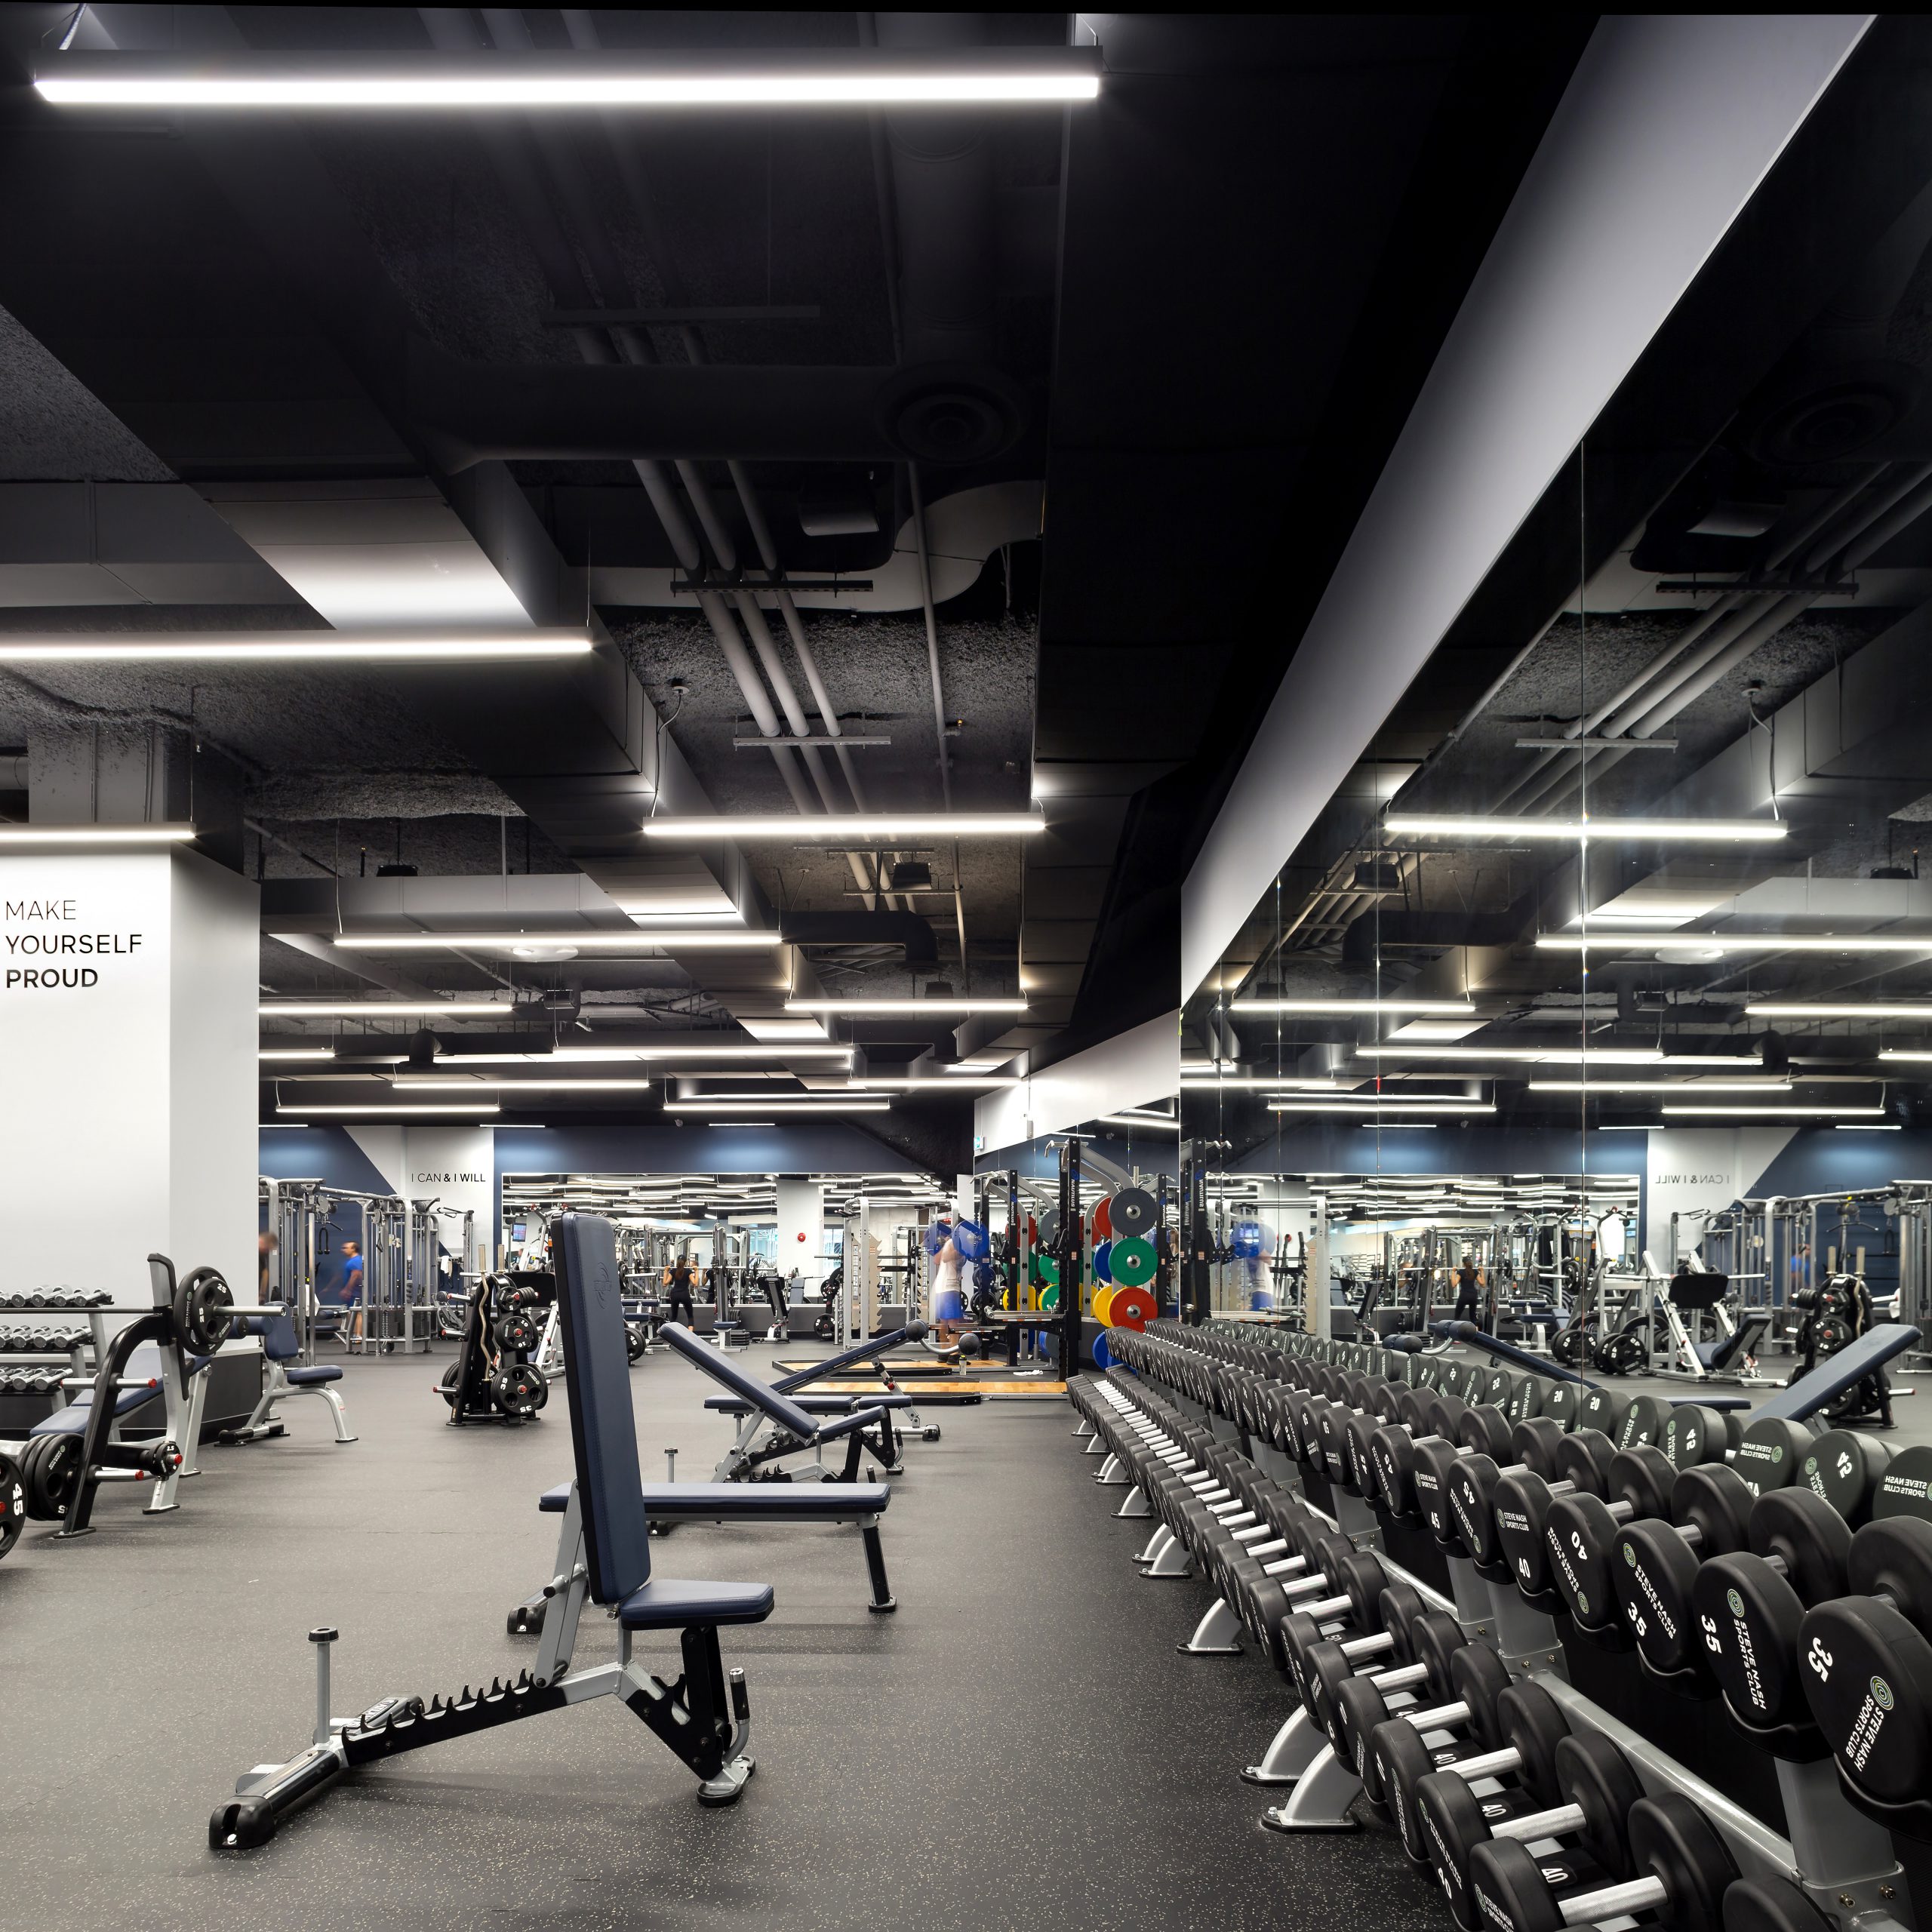 Free Weights Area, Gym Interior Design, Steve Nash Park Royal in West Vancouver BC, by Cutler